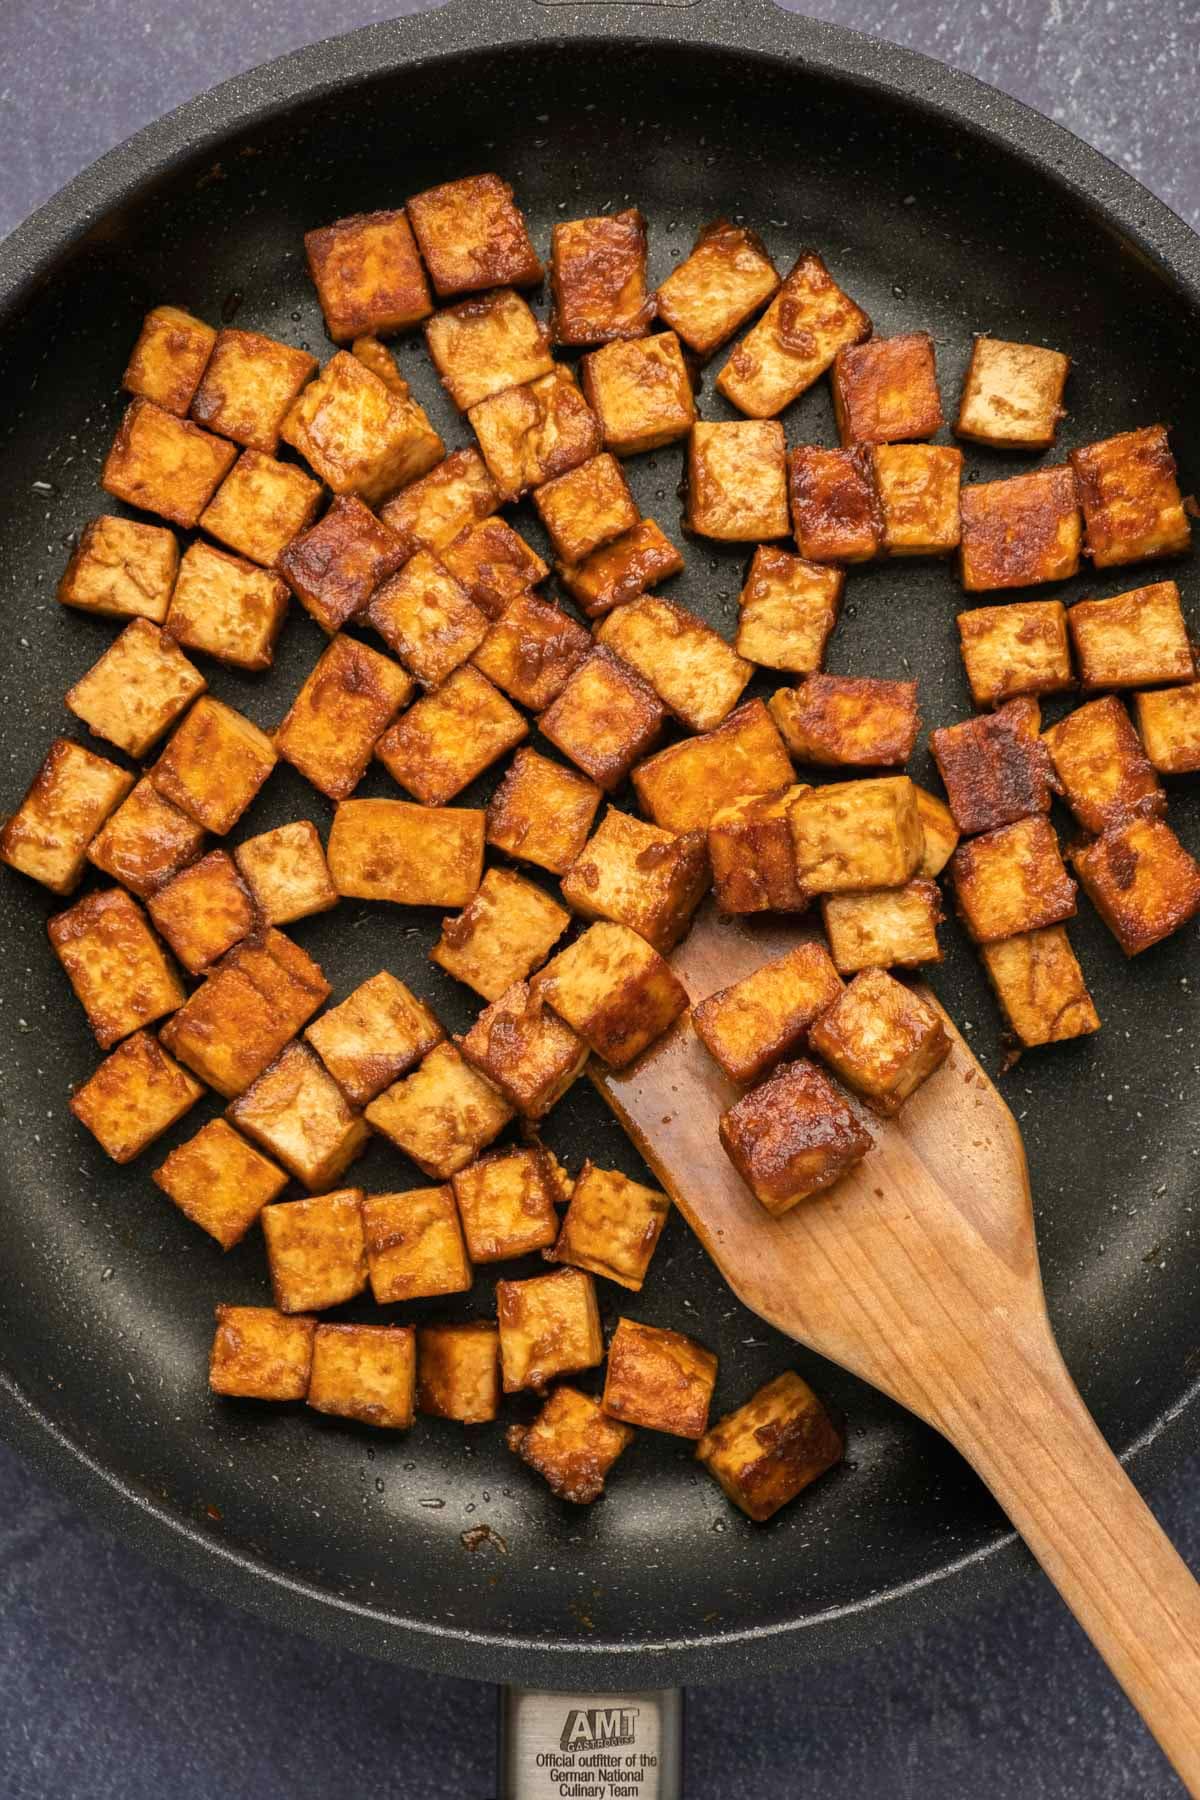 Marinated tofu in a frying pan.